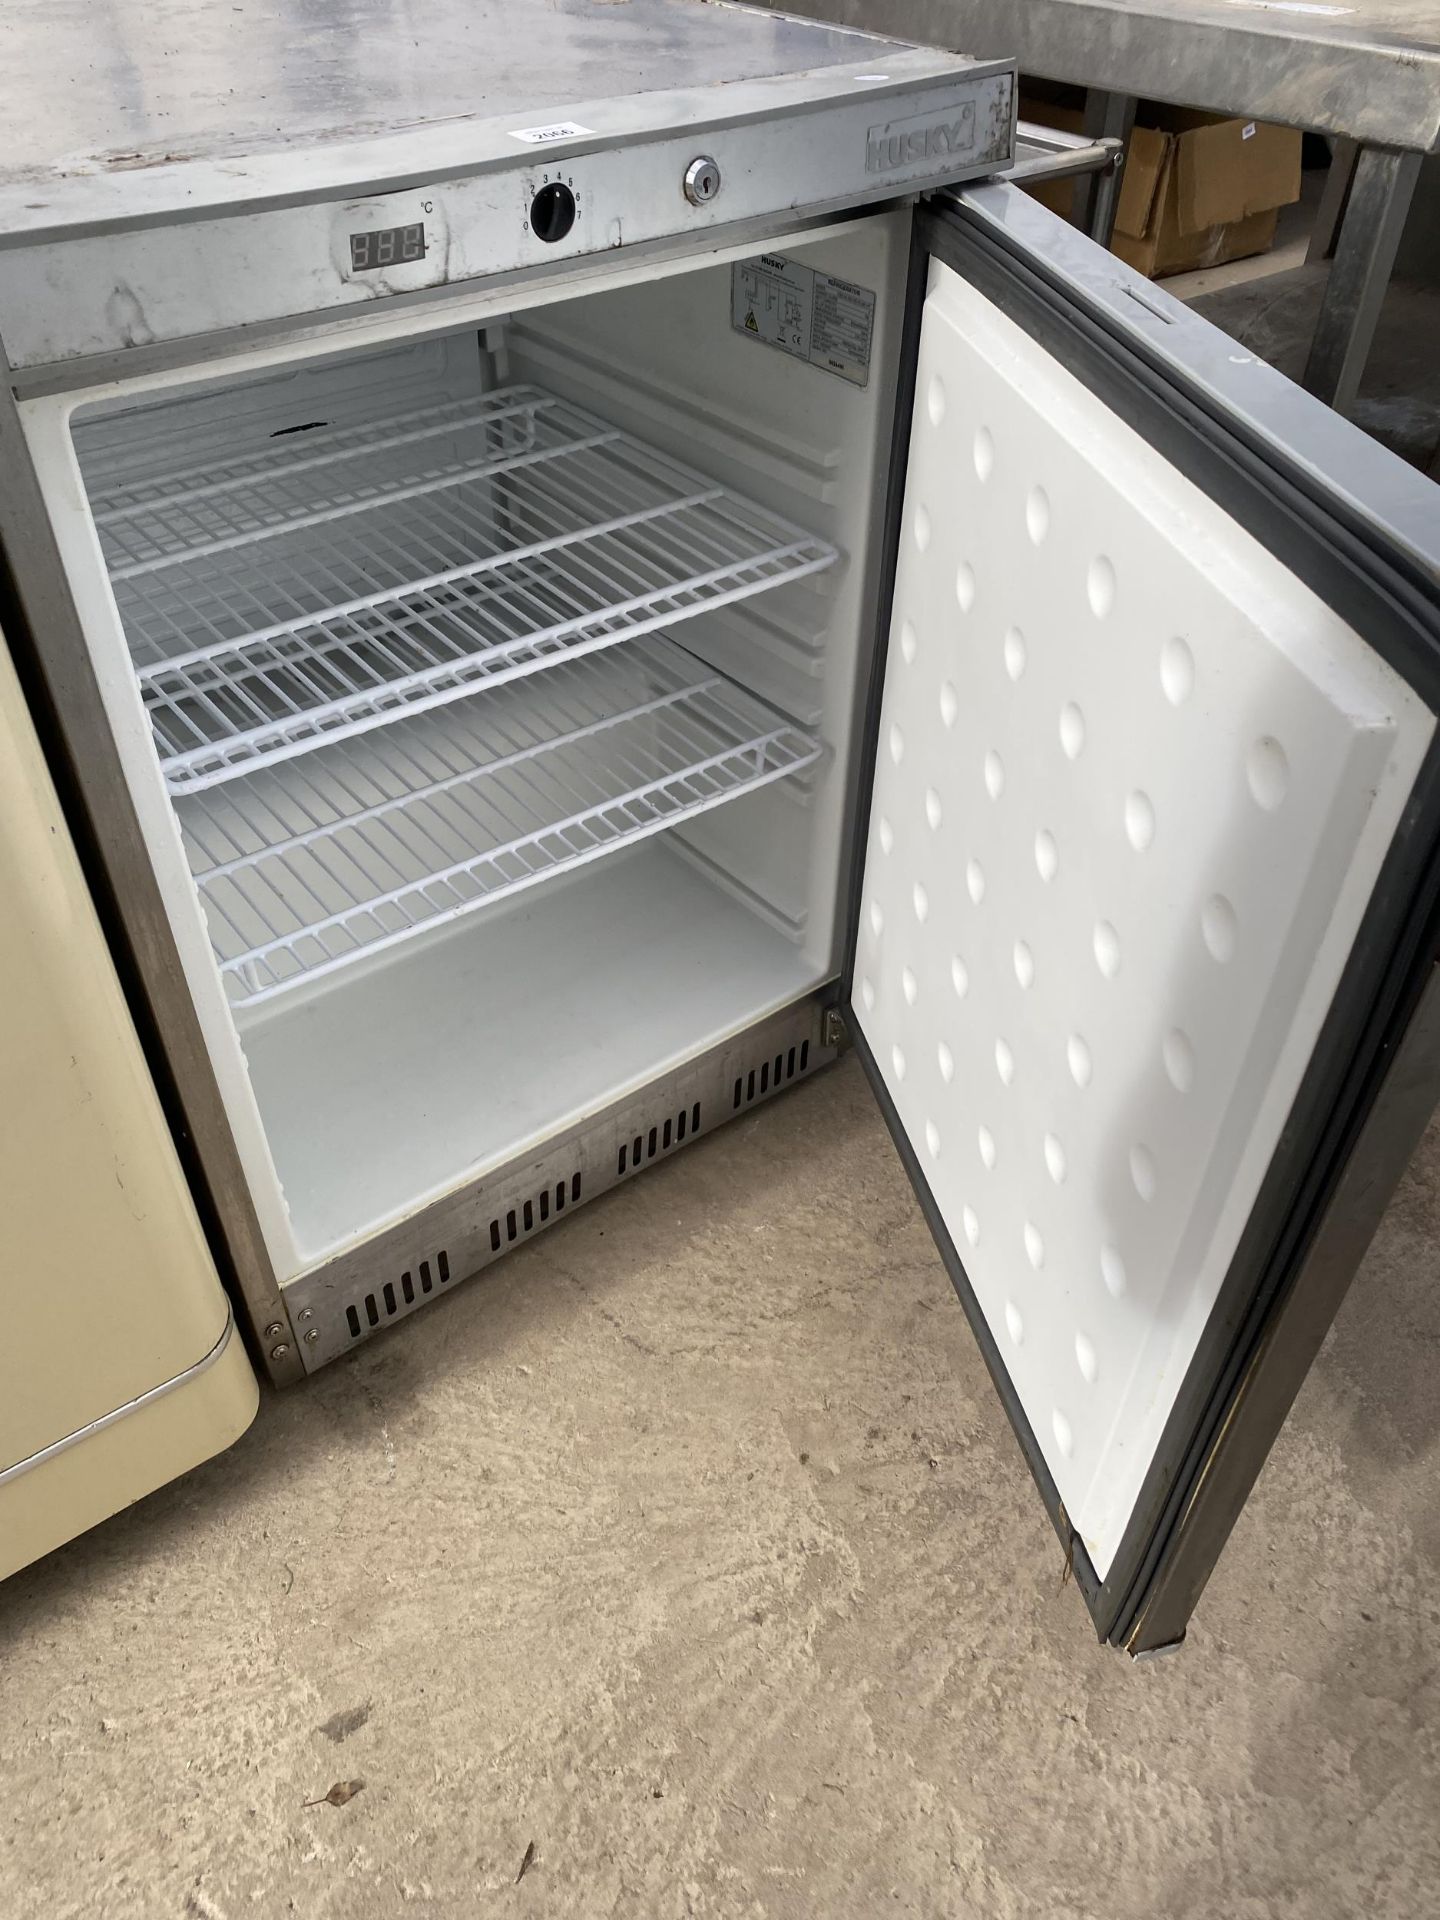 A SILVER INDUSTRIAL HUSKY UNDERCOUNTER FRIDGE - Image 2 of 2